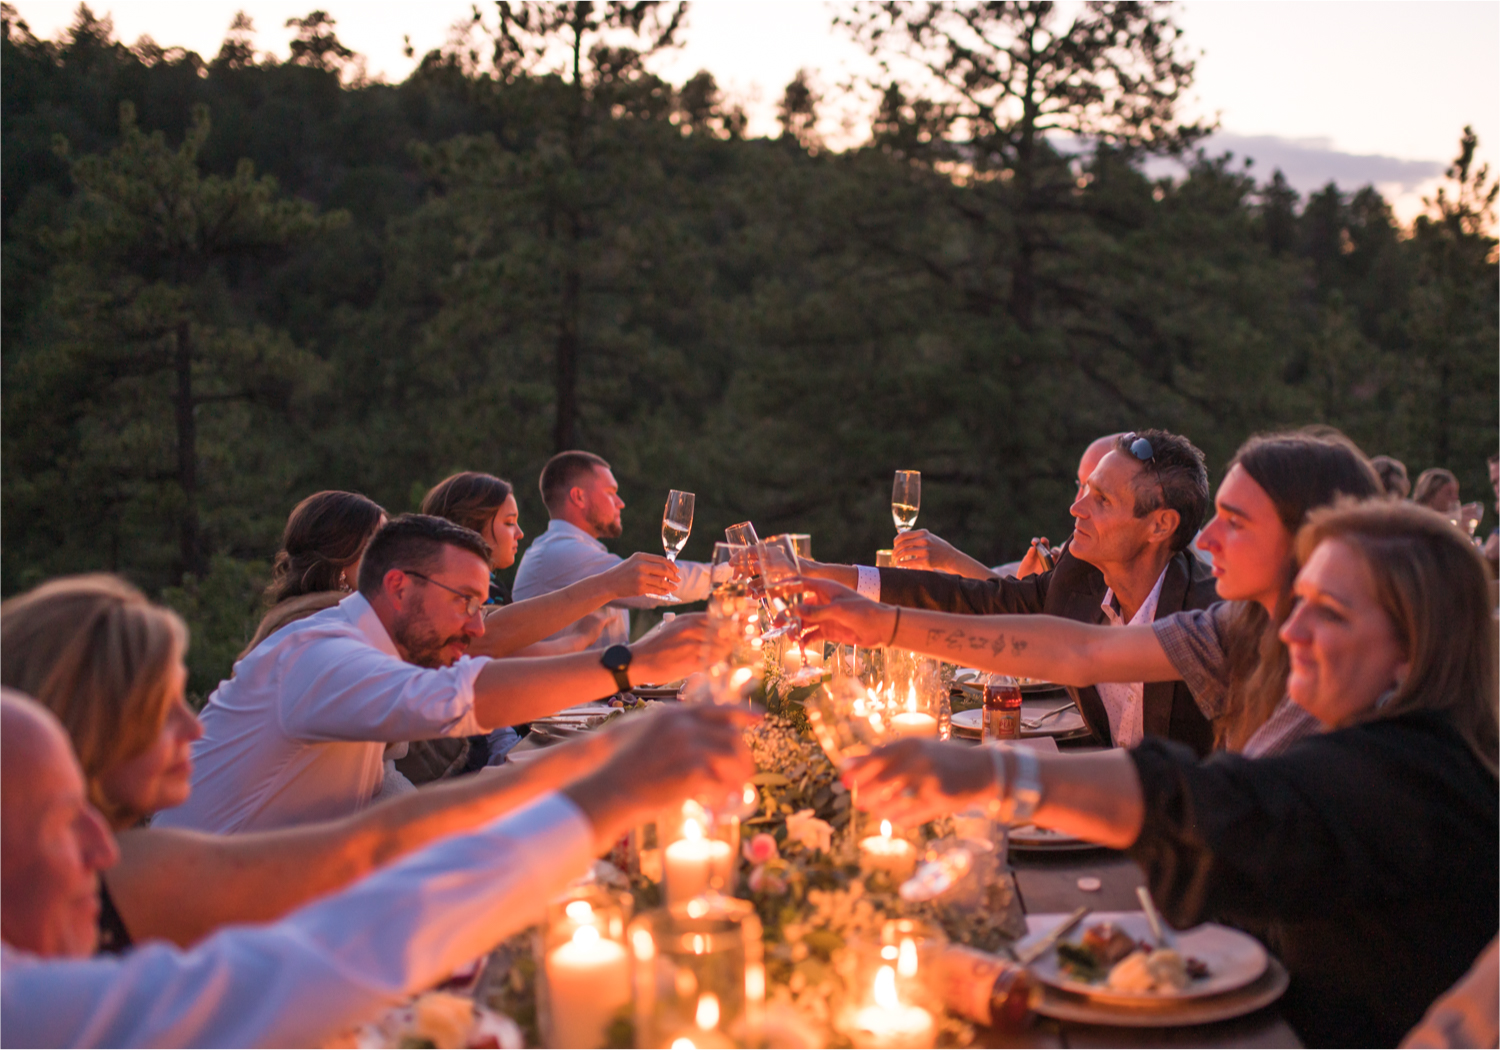 Autumn mountain wedding in Florence Colorado | Britni Girard Photography | Colorado Wedding Photo and Video Team | Mountainside Cabin for intimate wedding with rustic farm-tables and romantic details | Sunset Toast with food by The Picnic Basket